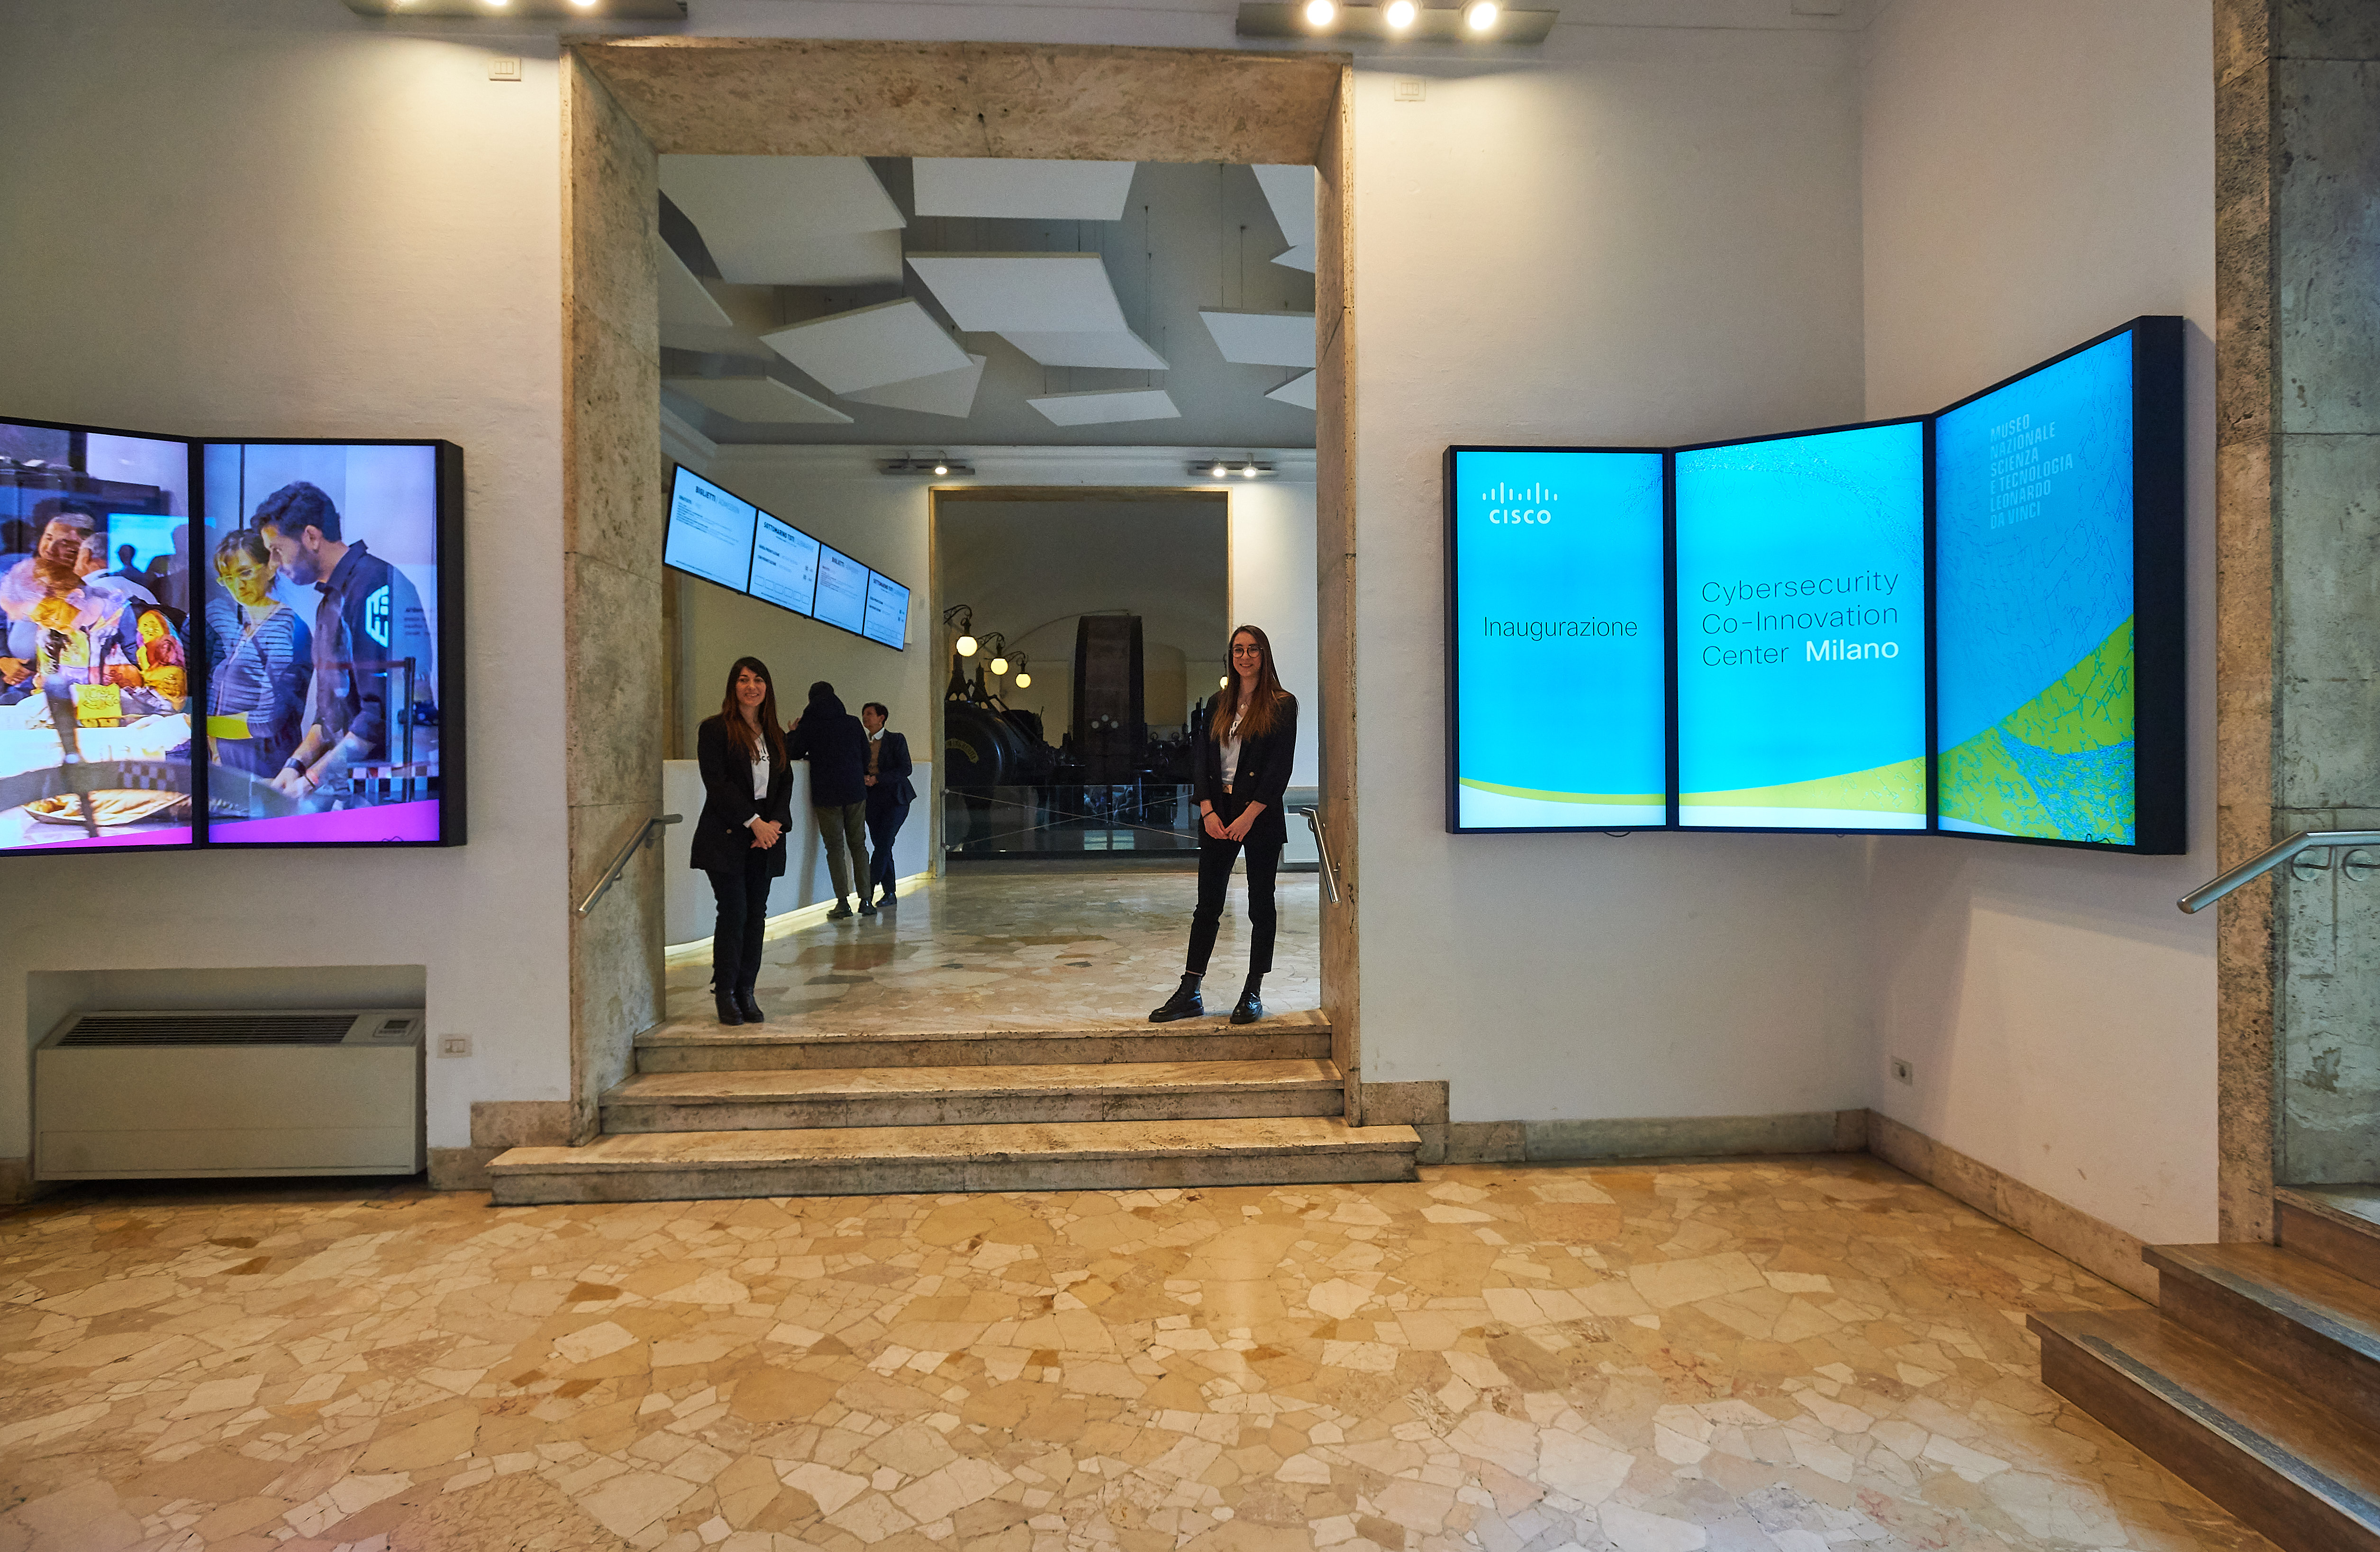 Cisco’s new Cybersecurity Co-Innovation Center inside one of Europe’s most famous museums